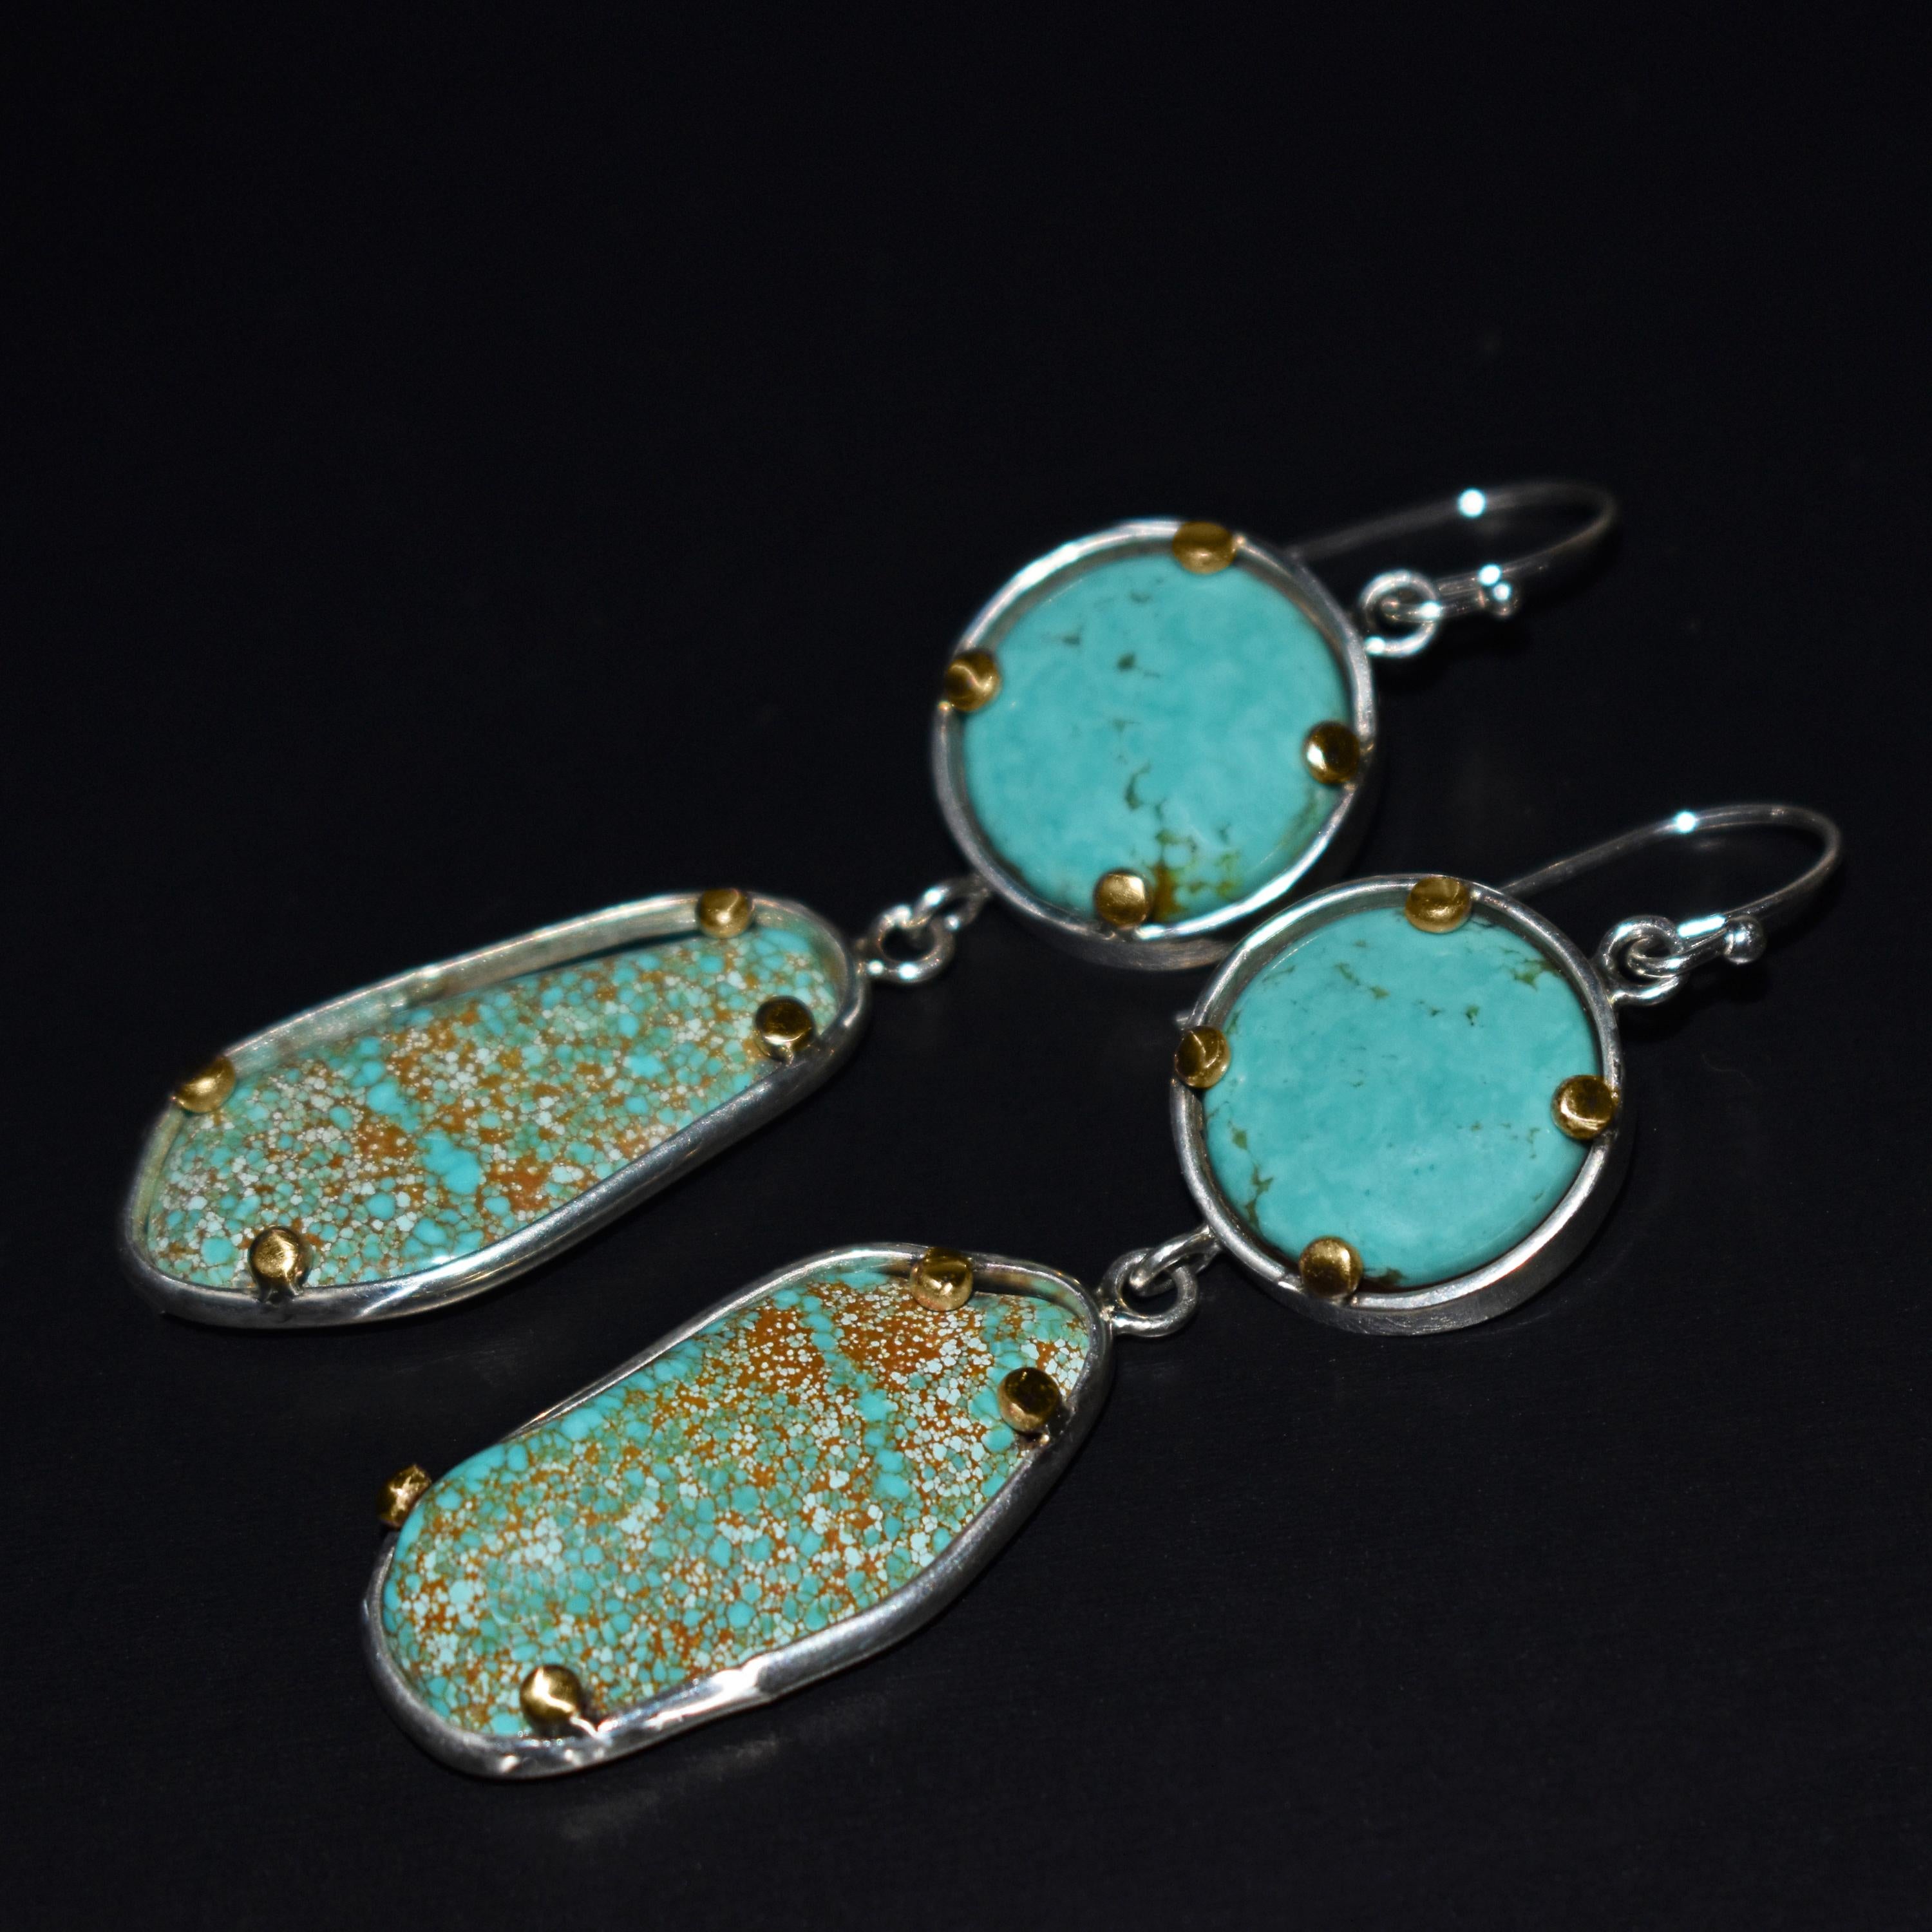 Handmade sterling silver with 14k yellow gold accents dangle earrings featuring gorgeous, natural Turquoise from Russia and the Easter Blue Turquoise mine in Nevada, USA. Earrings are 2.56 inches in length.